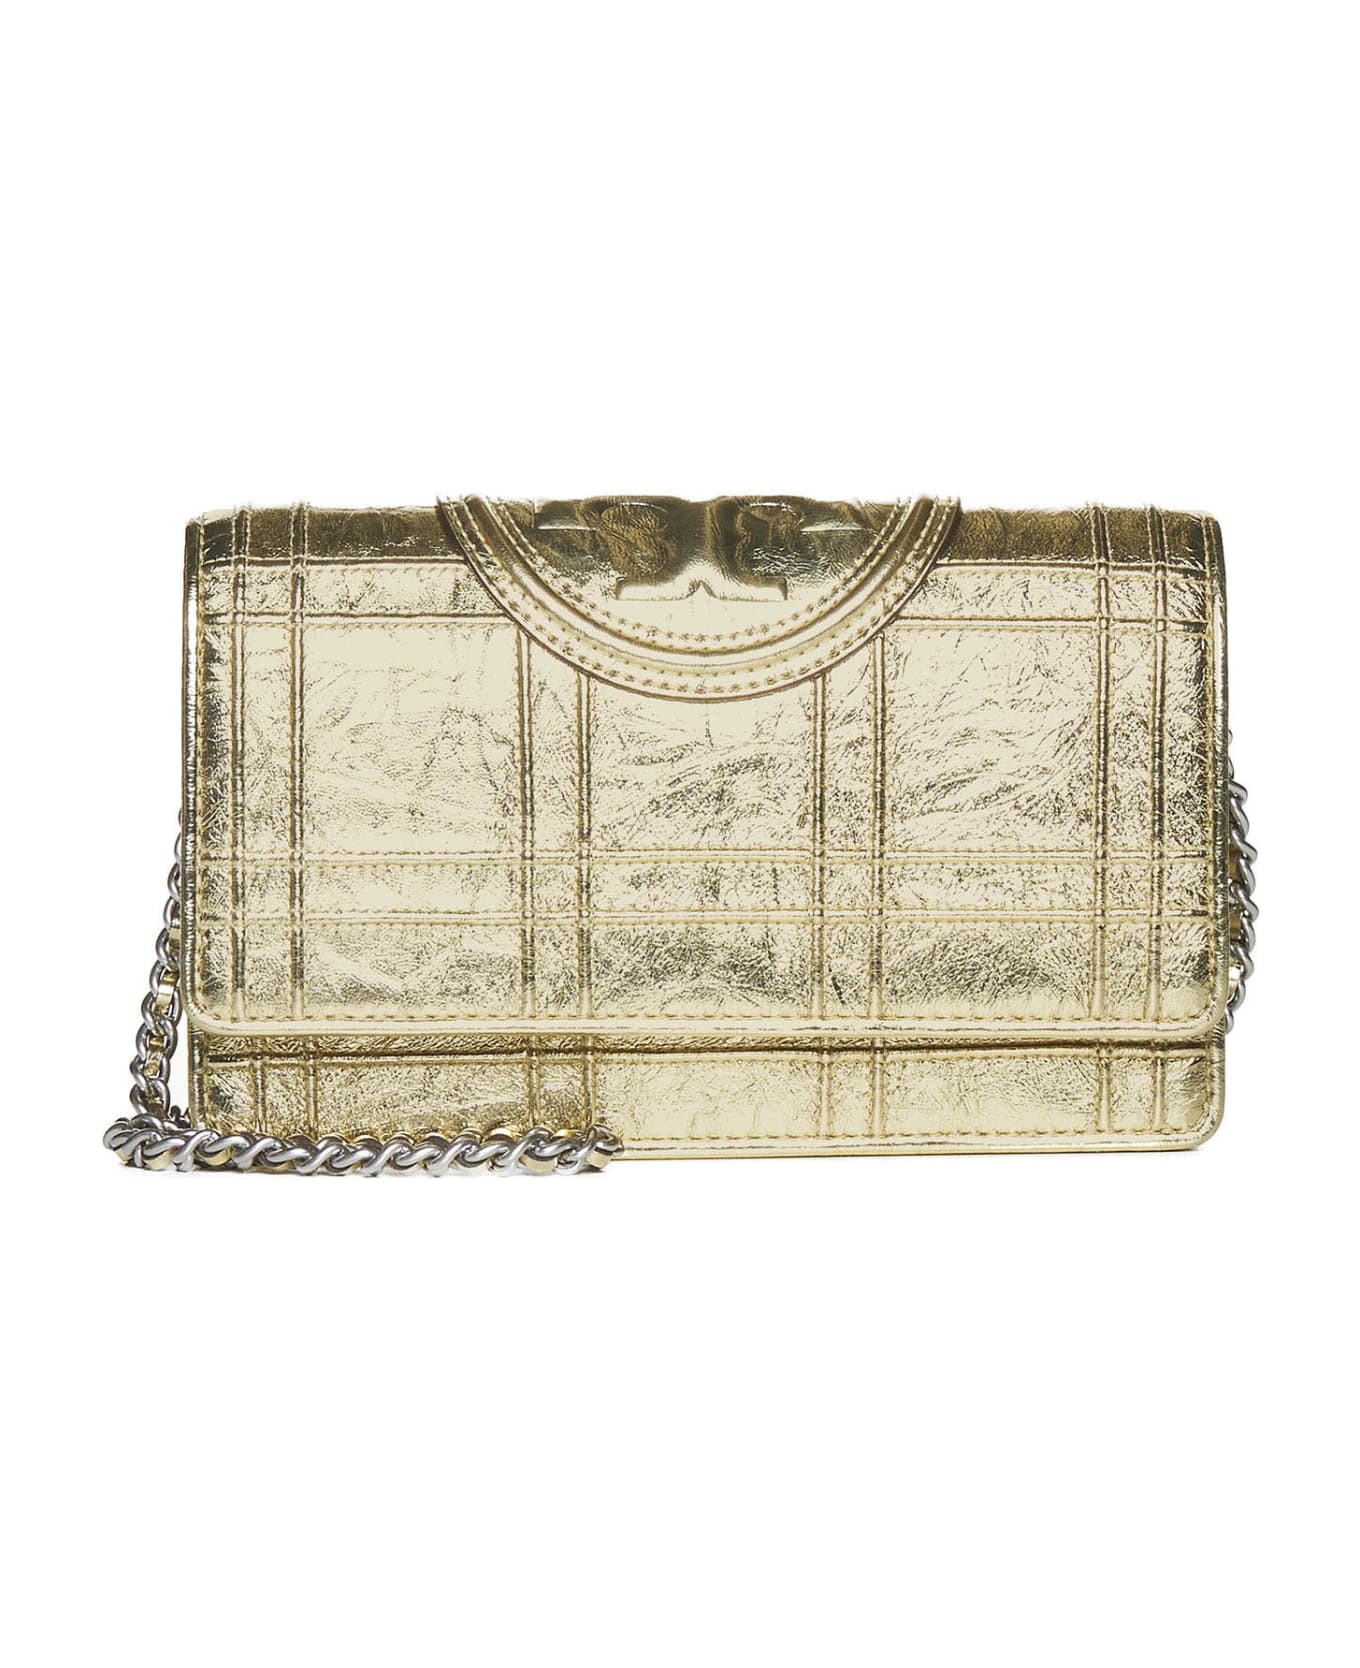 Tory Burch Fleming Soft Metallic Square Quilt Chain Wallet - Gold クラッチバッグ